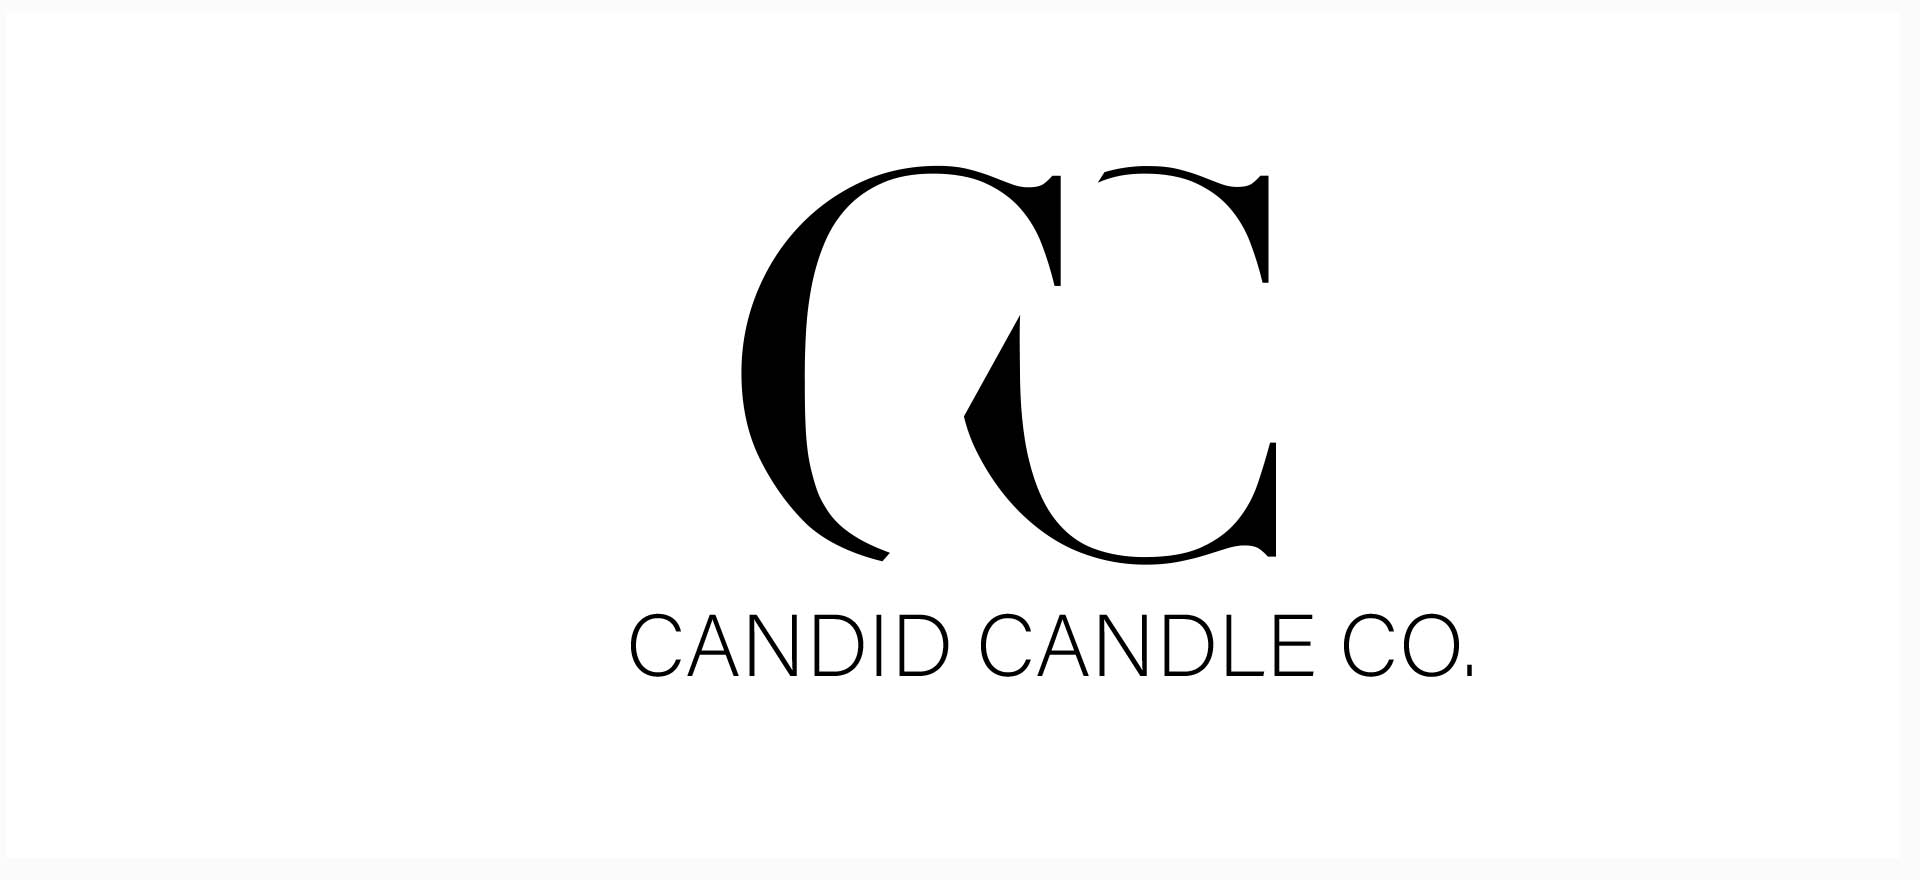 Candid Candle Co.